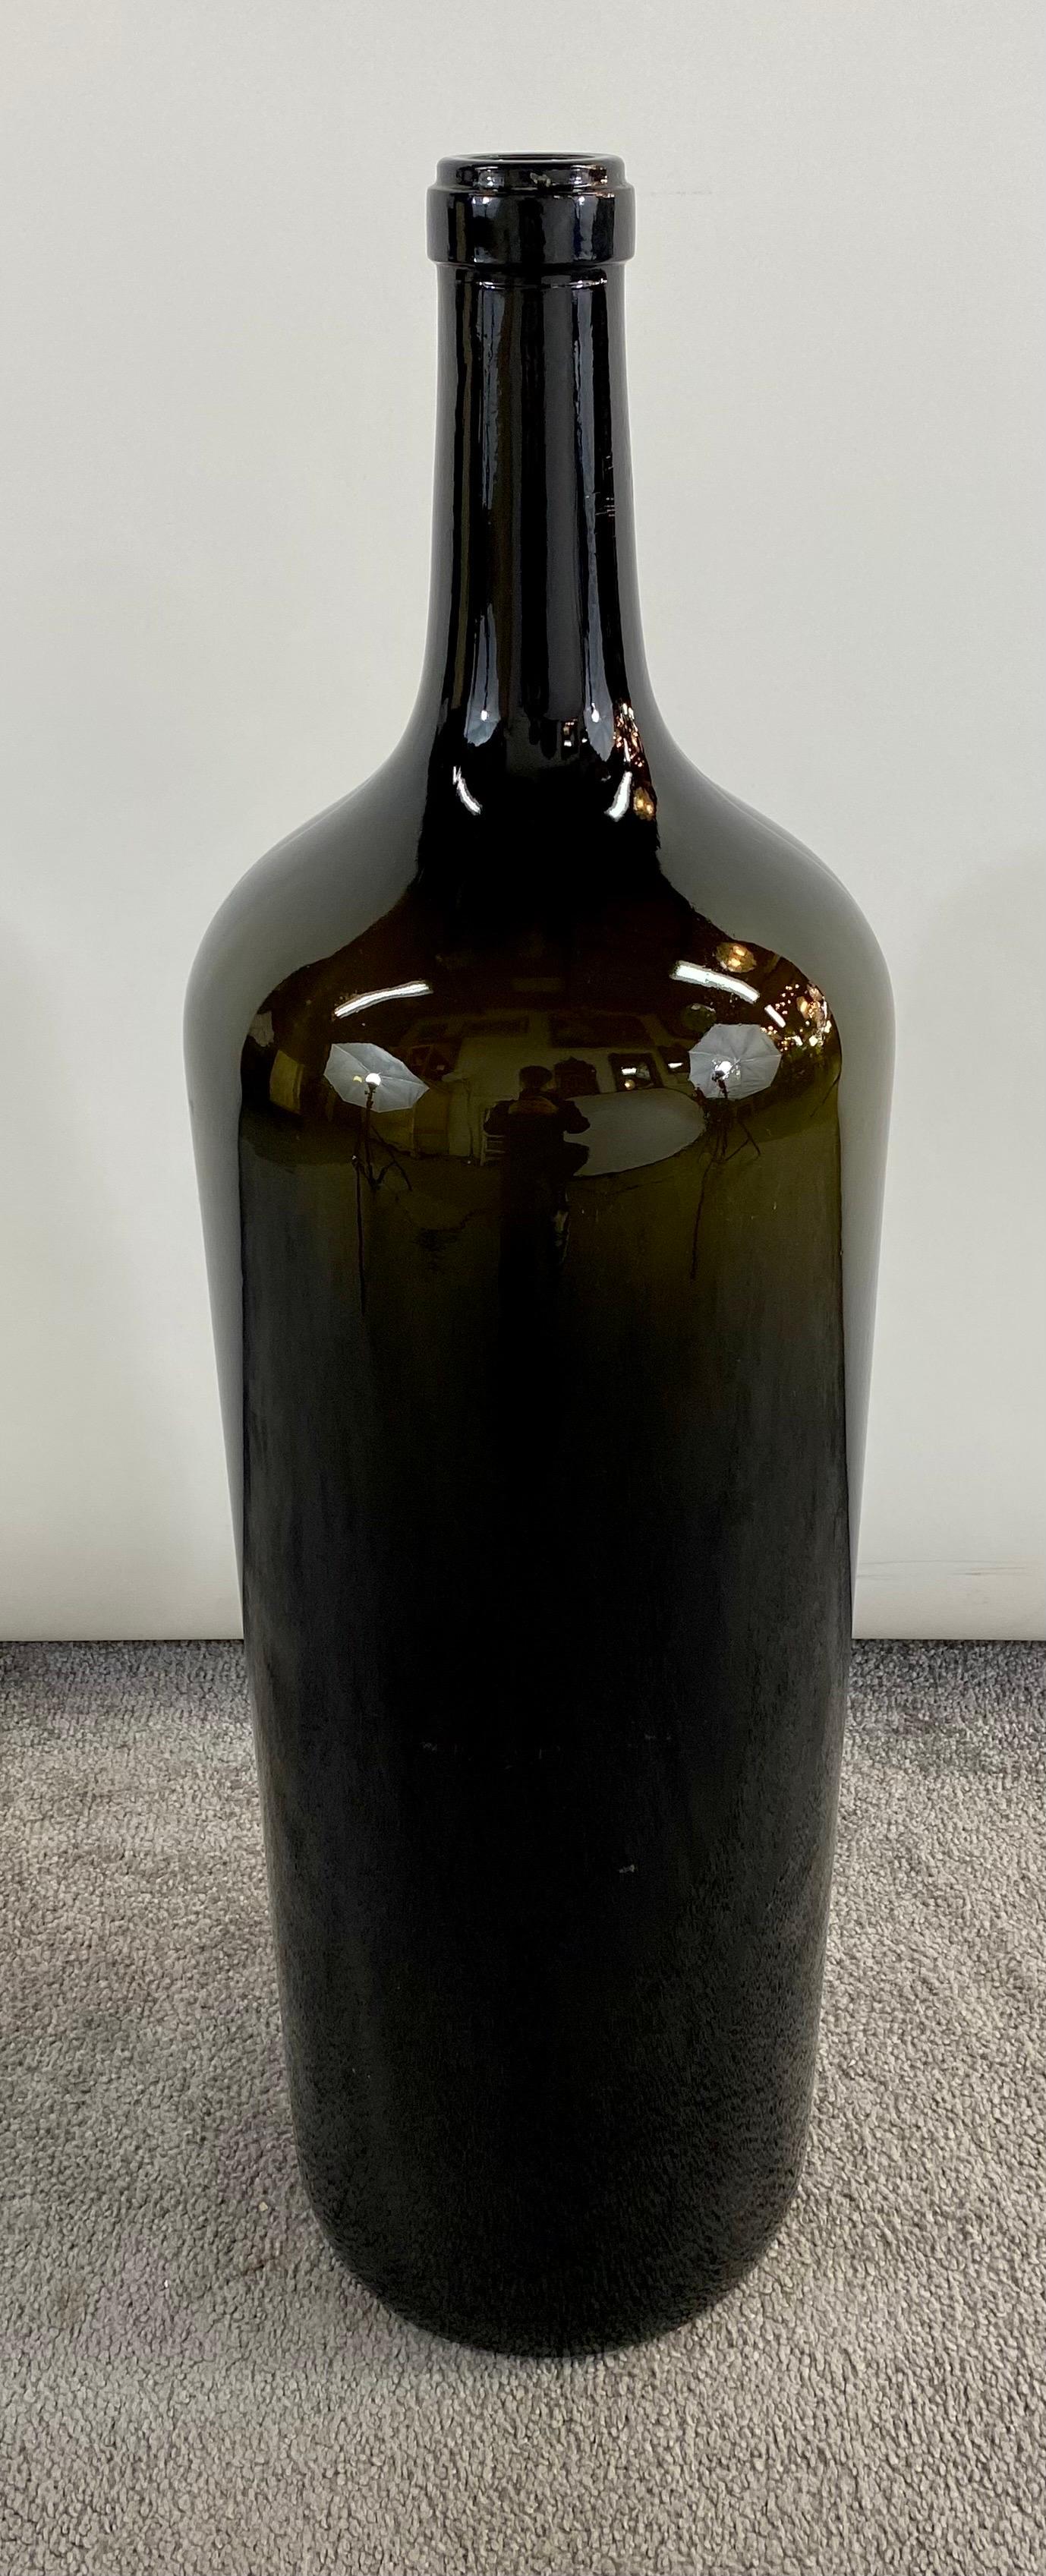 A large pair of vintage dark green blown glass Demijohn style bottles of wines. The bottles are sturdy and very decorative.  Embellish you room or wine cellar with these pair of large wine bottles or use them as urns to show your favorite